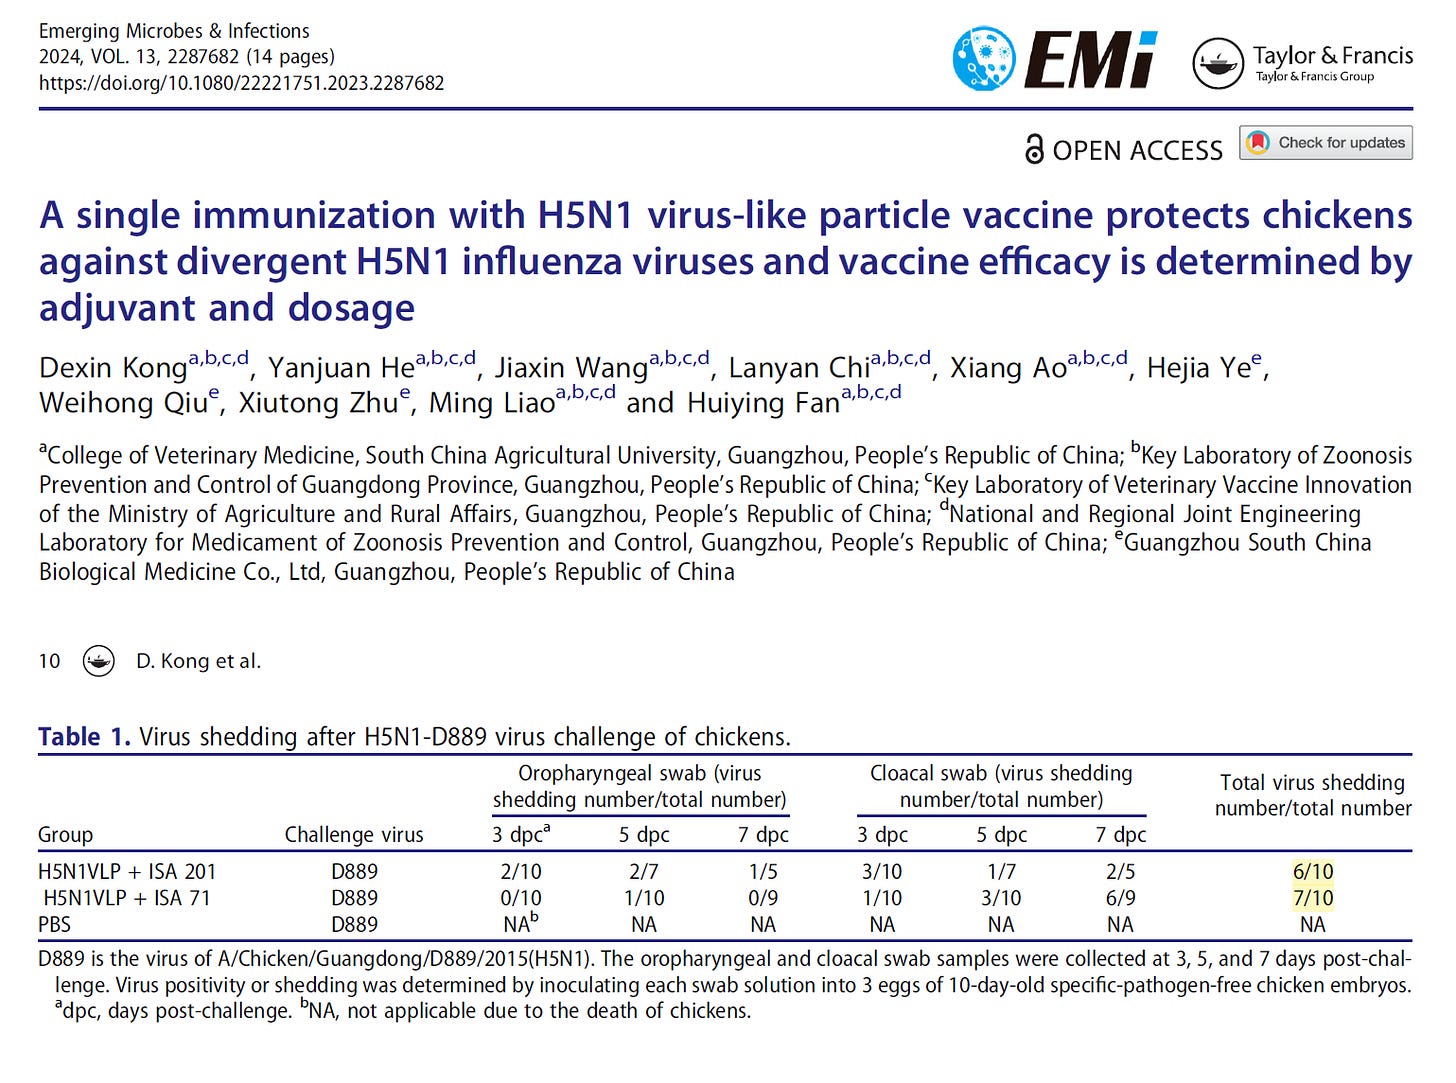 Chinese Single Immunization with H5N1 Virus-like Particle Vaccine Protects Chickens Against H5N1 Influenza but Enables More Viral Shedding